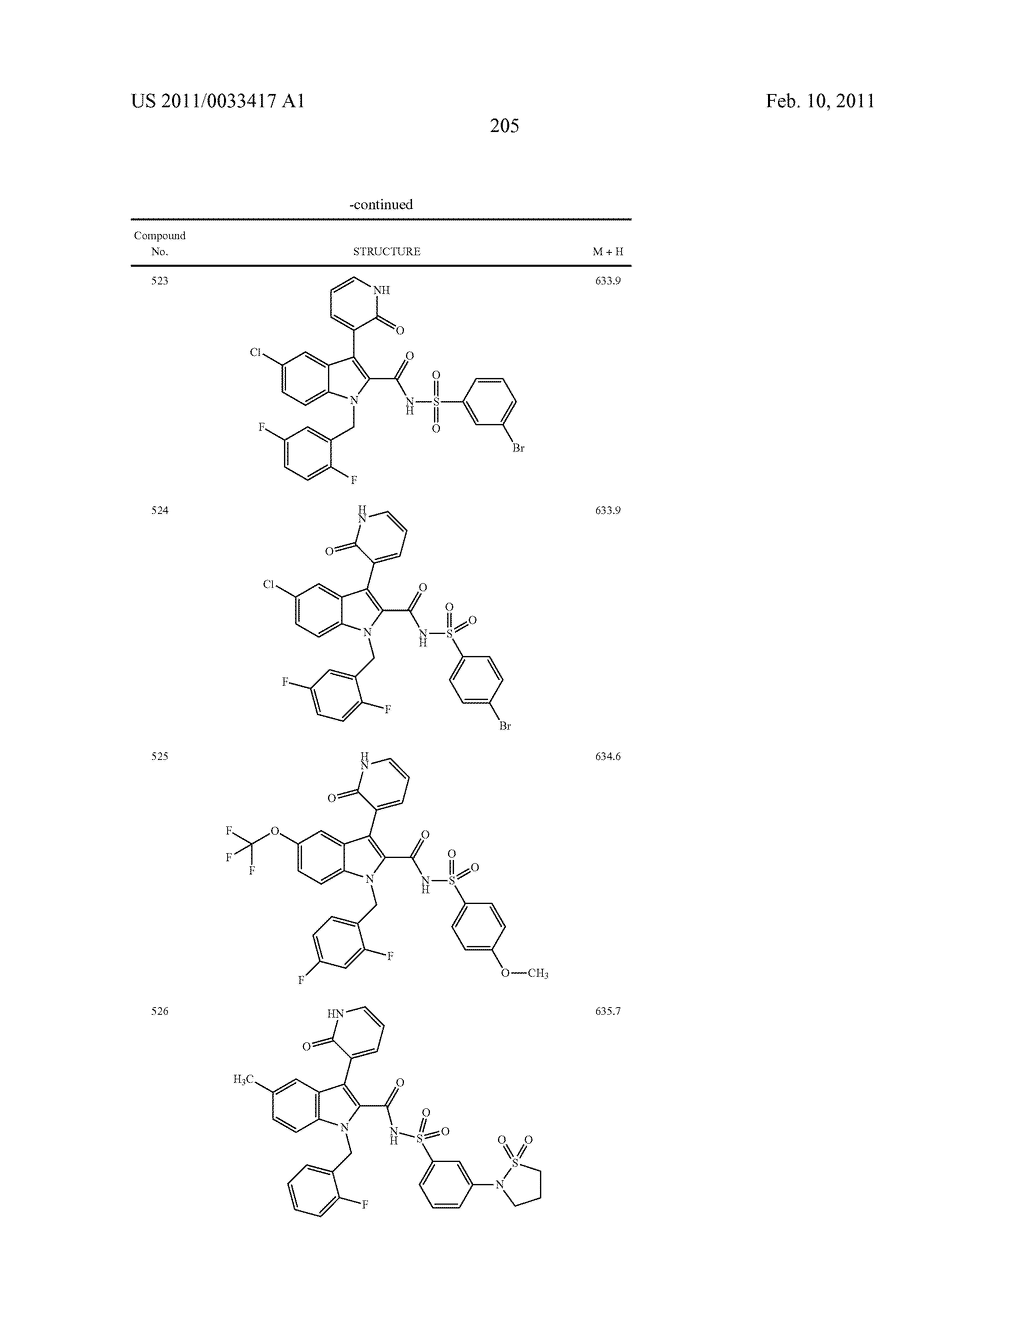 2,3-SUBSTITUTED INDOLE DERIVATIVES FOR TREATING VIRAL INFECTIONS - diagram, schematic, and image 206